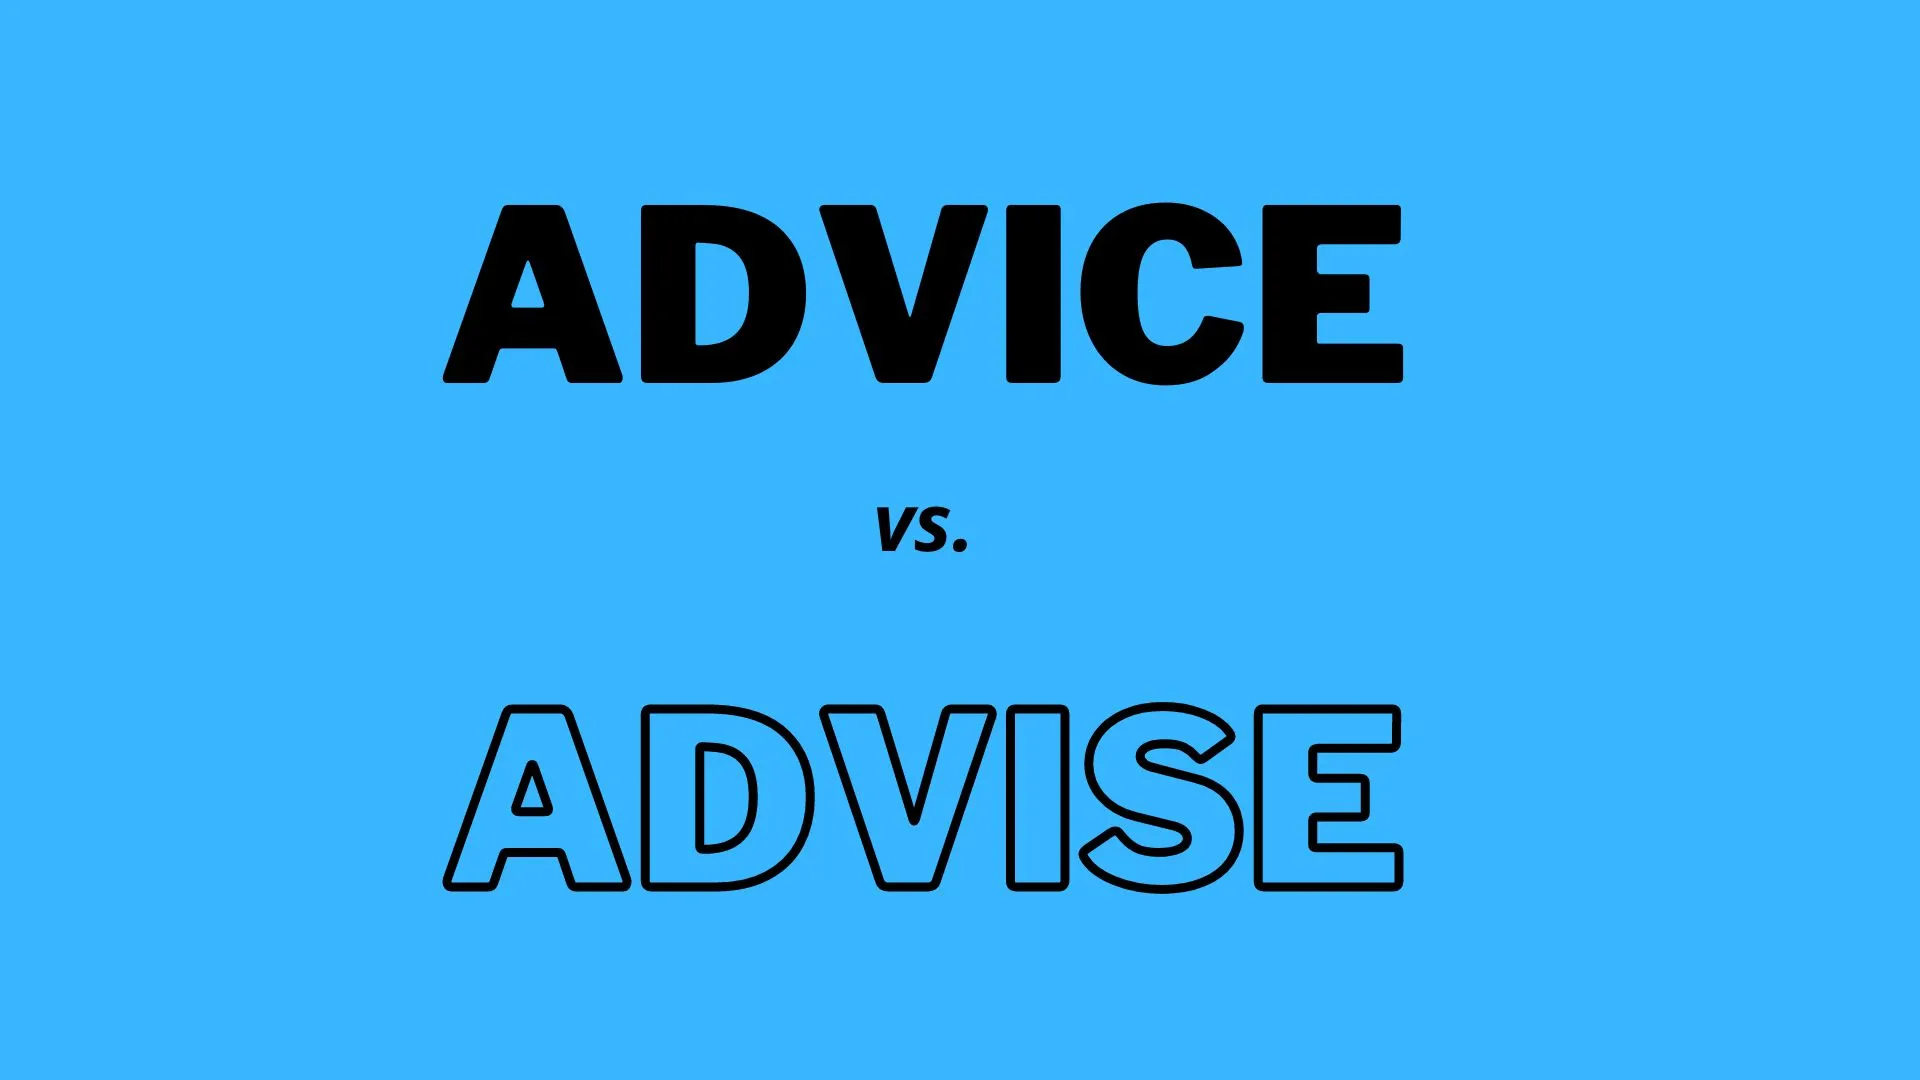 Difference between “Advice” and “Advise"